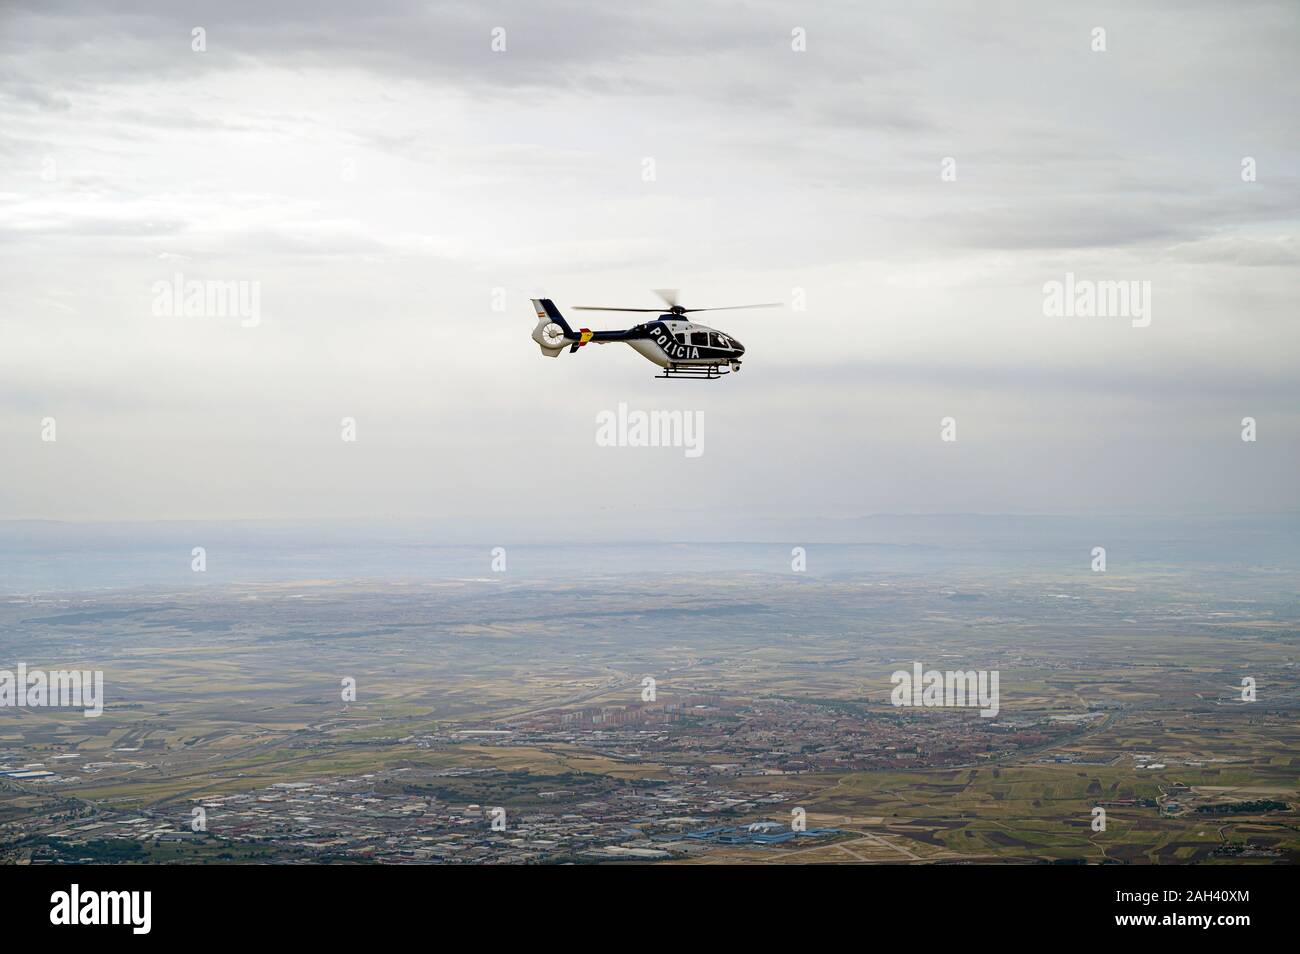 Spain, Madrid, Police helicopter flying above city Stock Photo